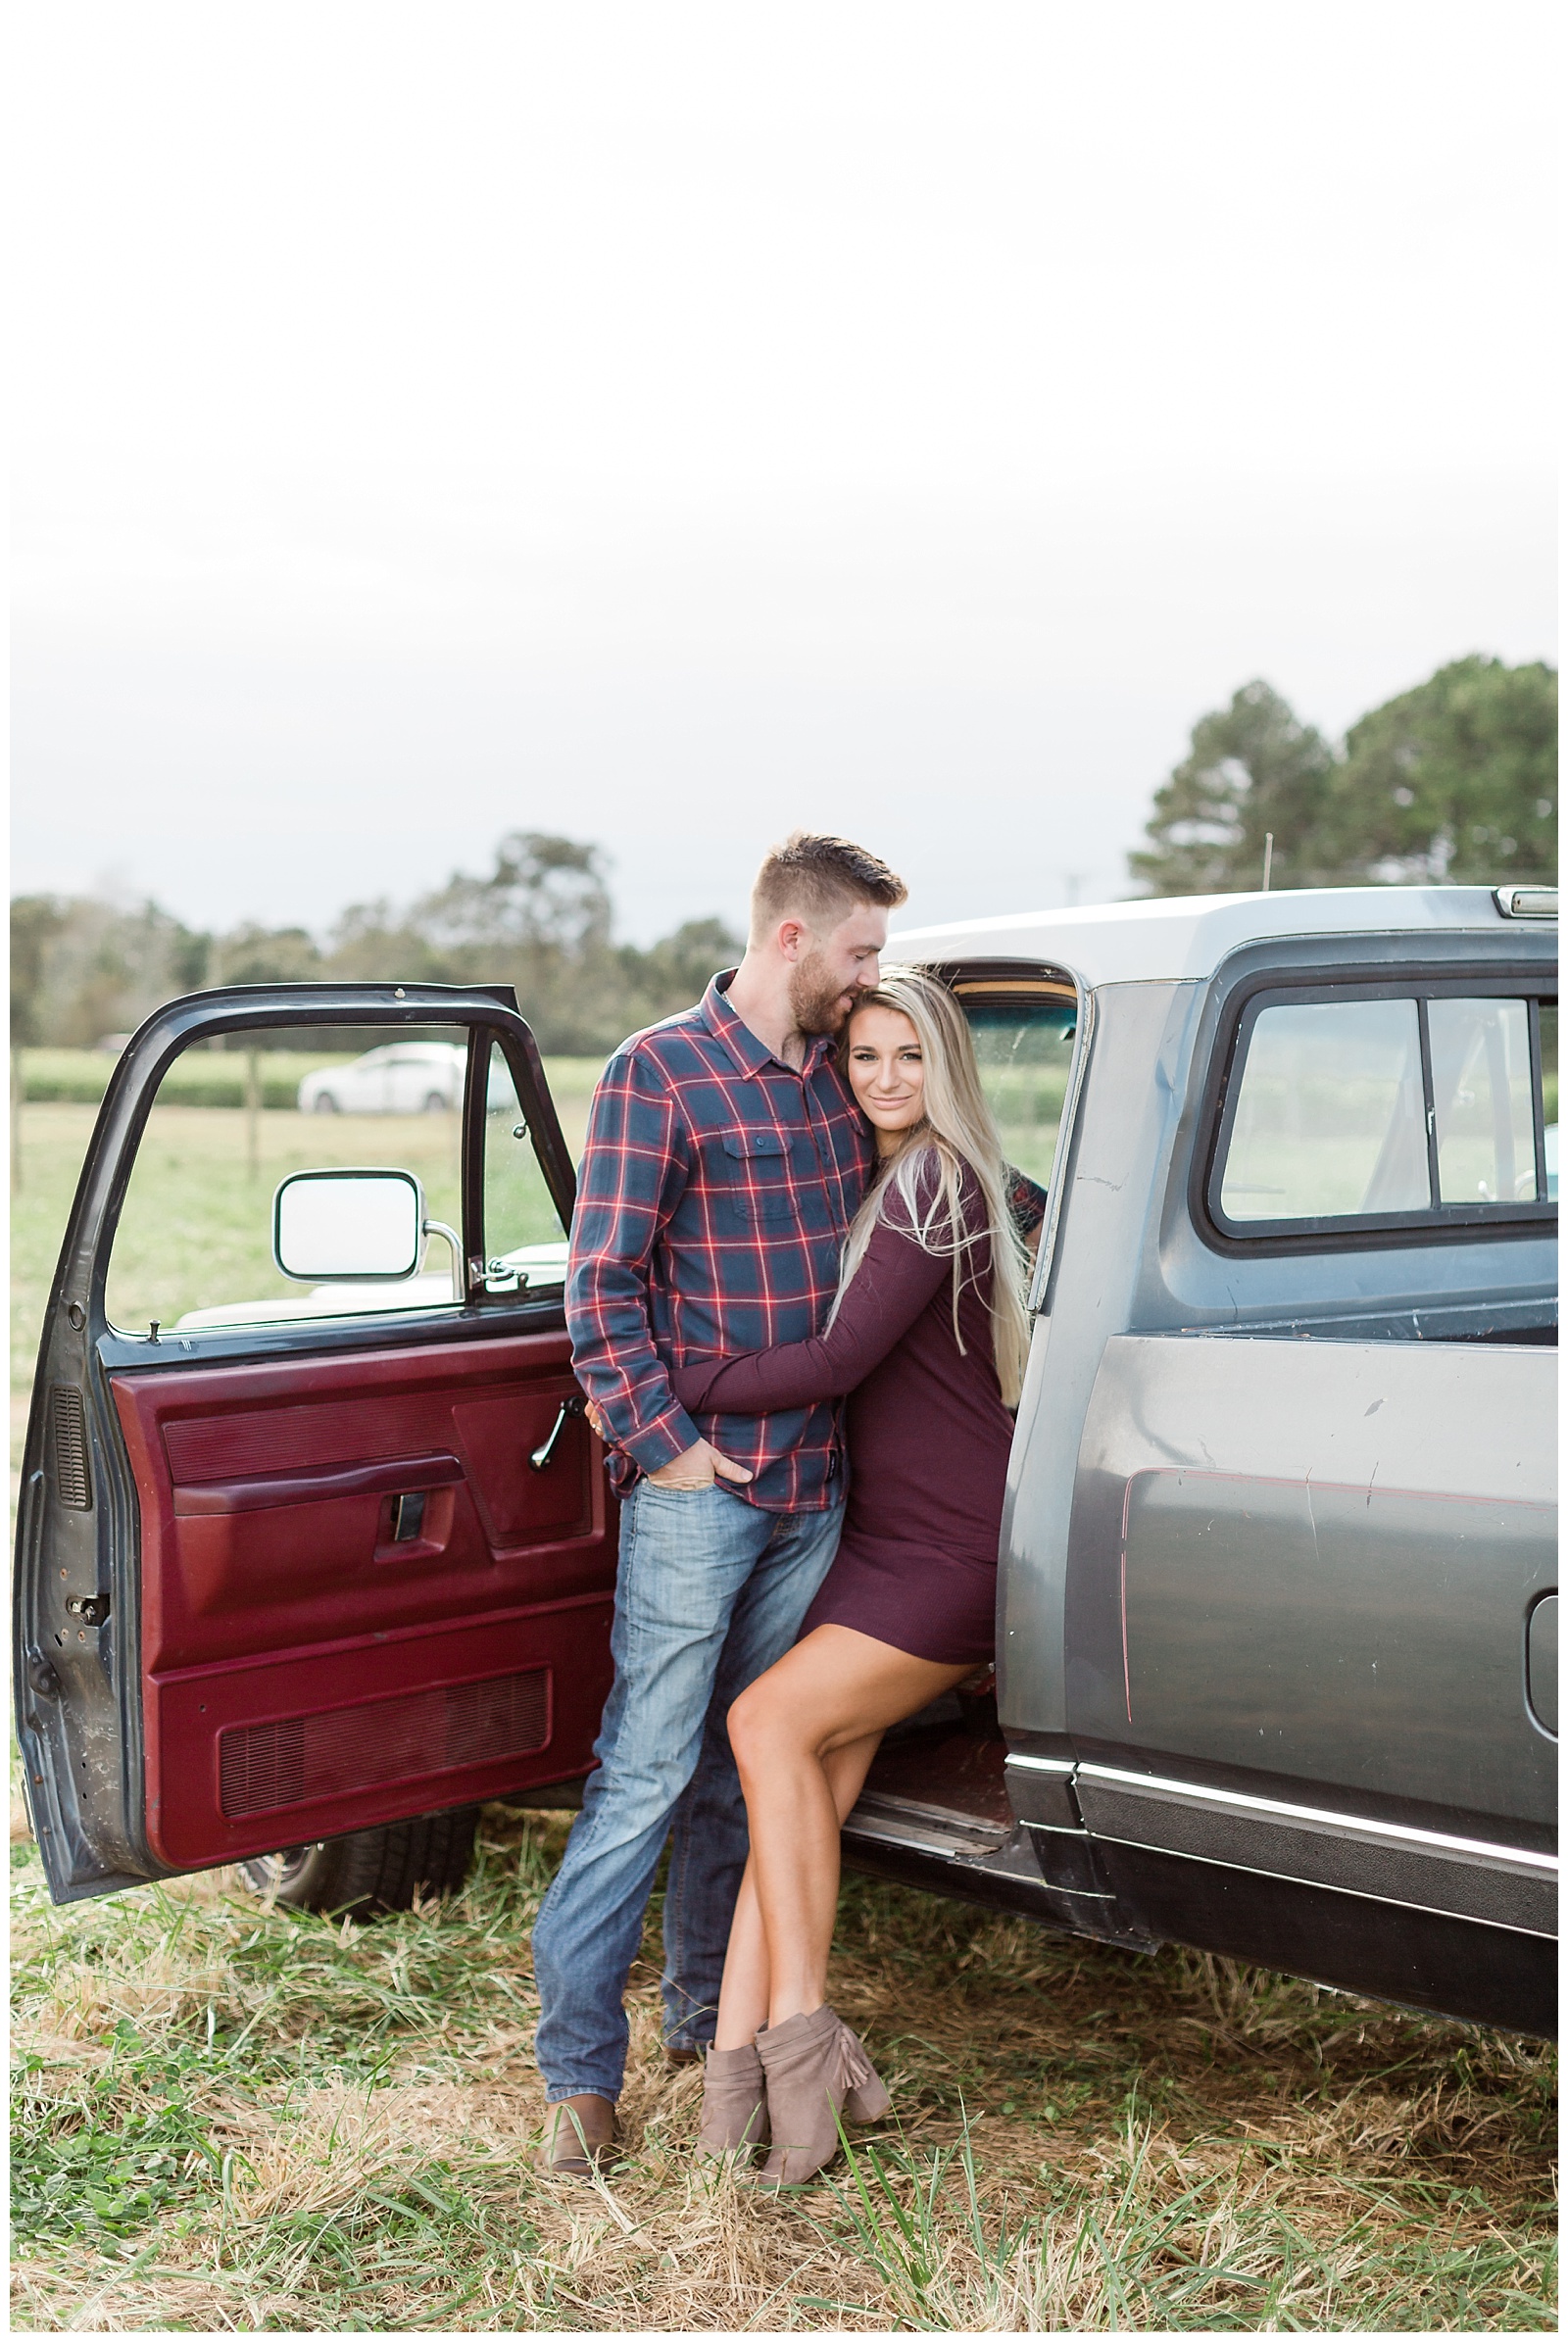 cullipher-farms-engagement-session-16.jpg